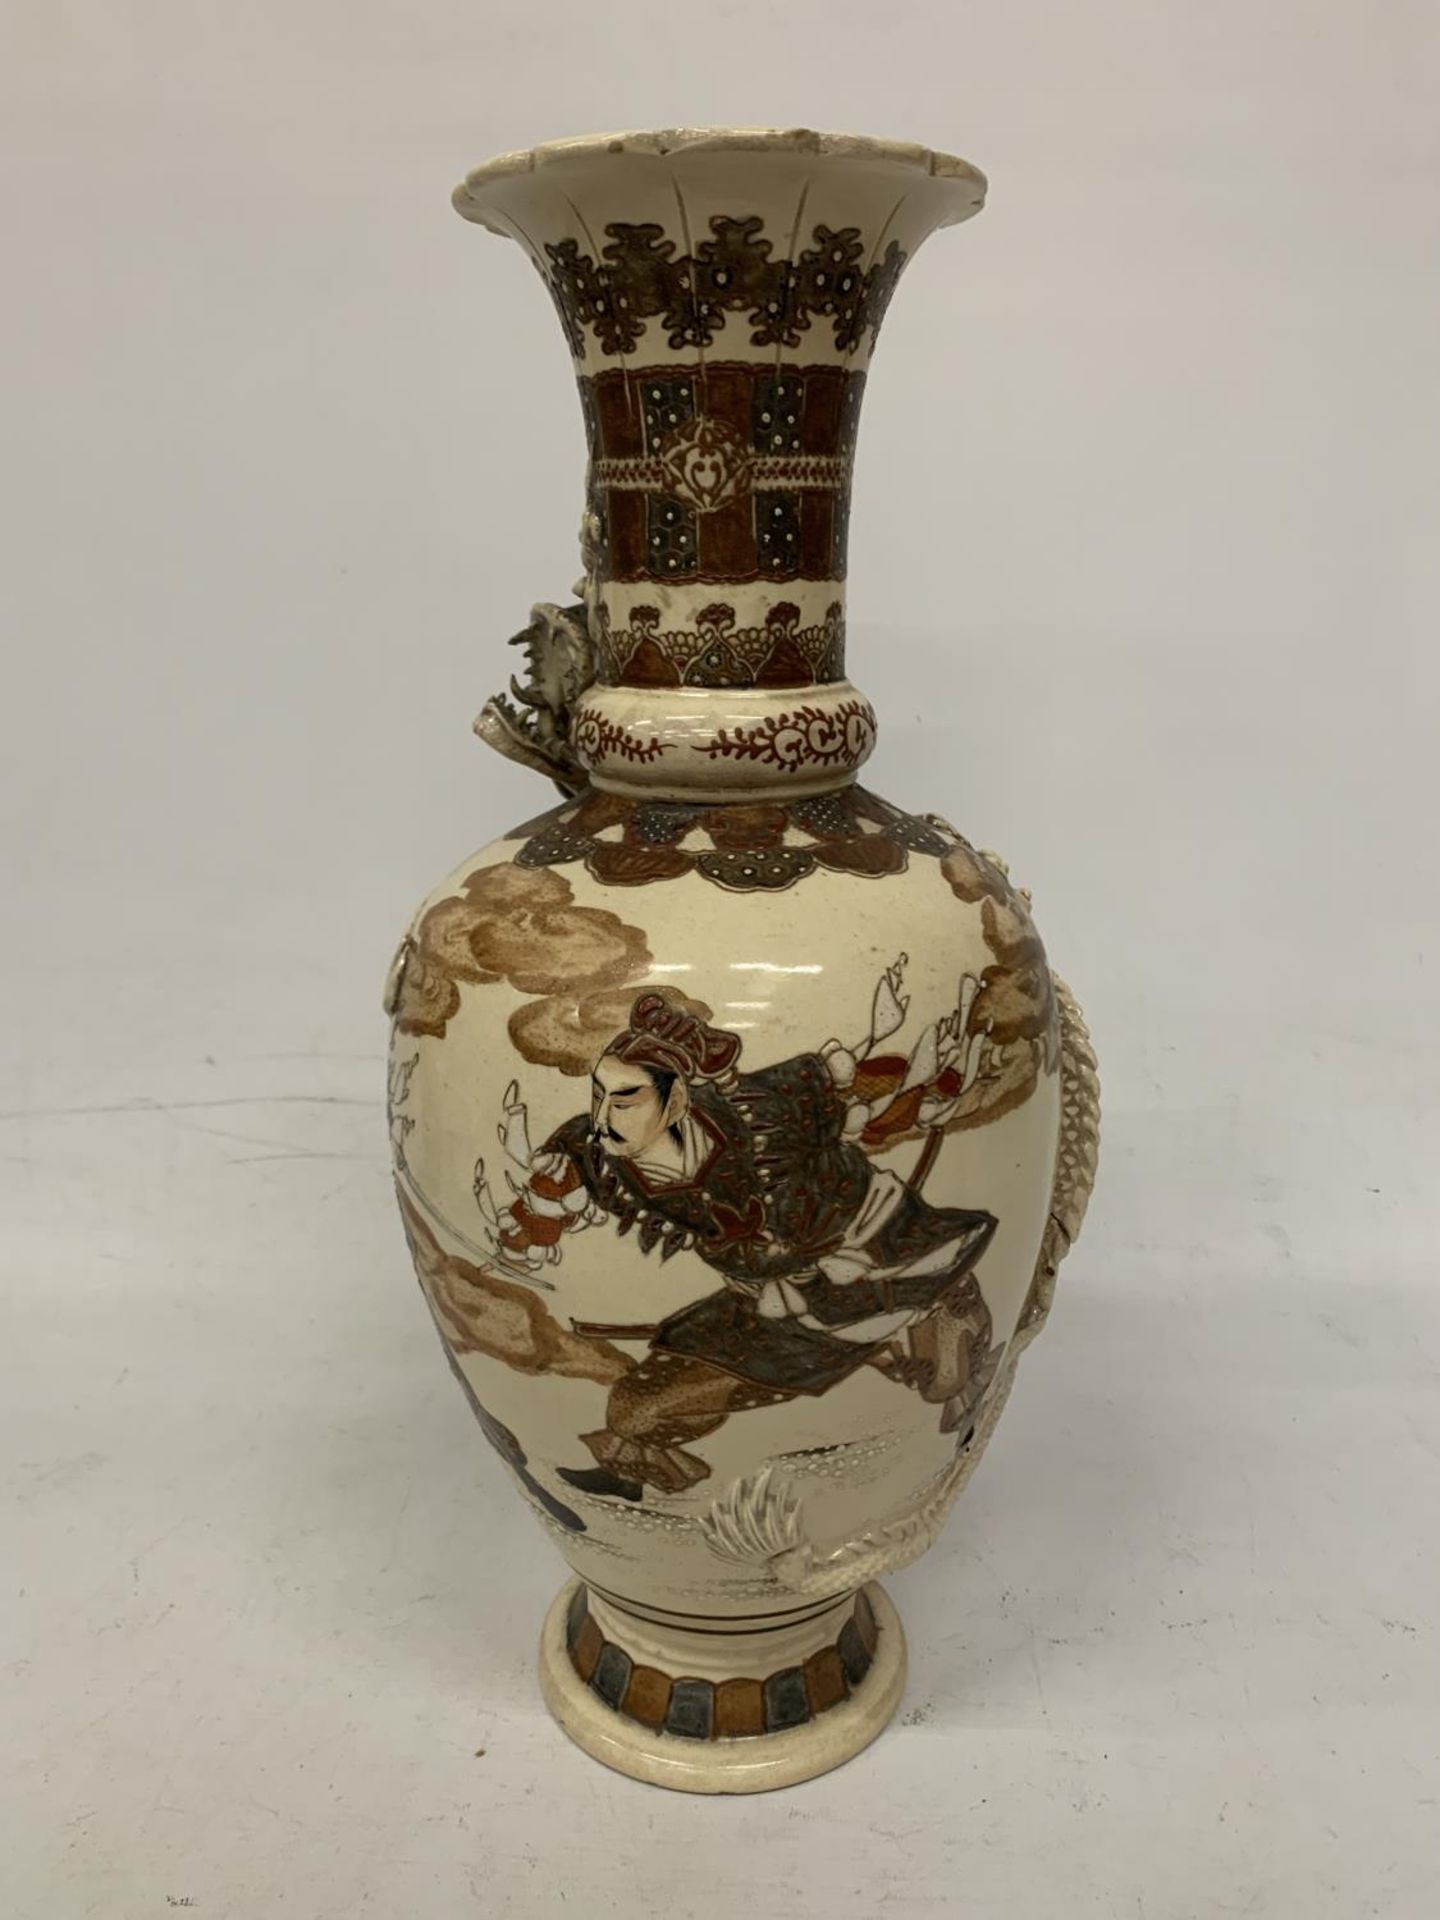 A LARGE 19TH CENTURY JAPANESE SATSUMA VASE DECORATED WITH SAMURAI WARRIORS AND DRAGON DETAIL - - Image 3 of 4